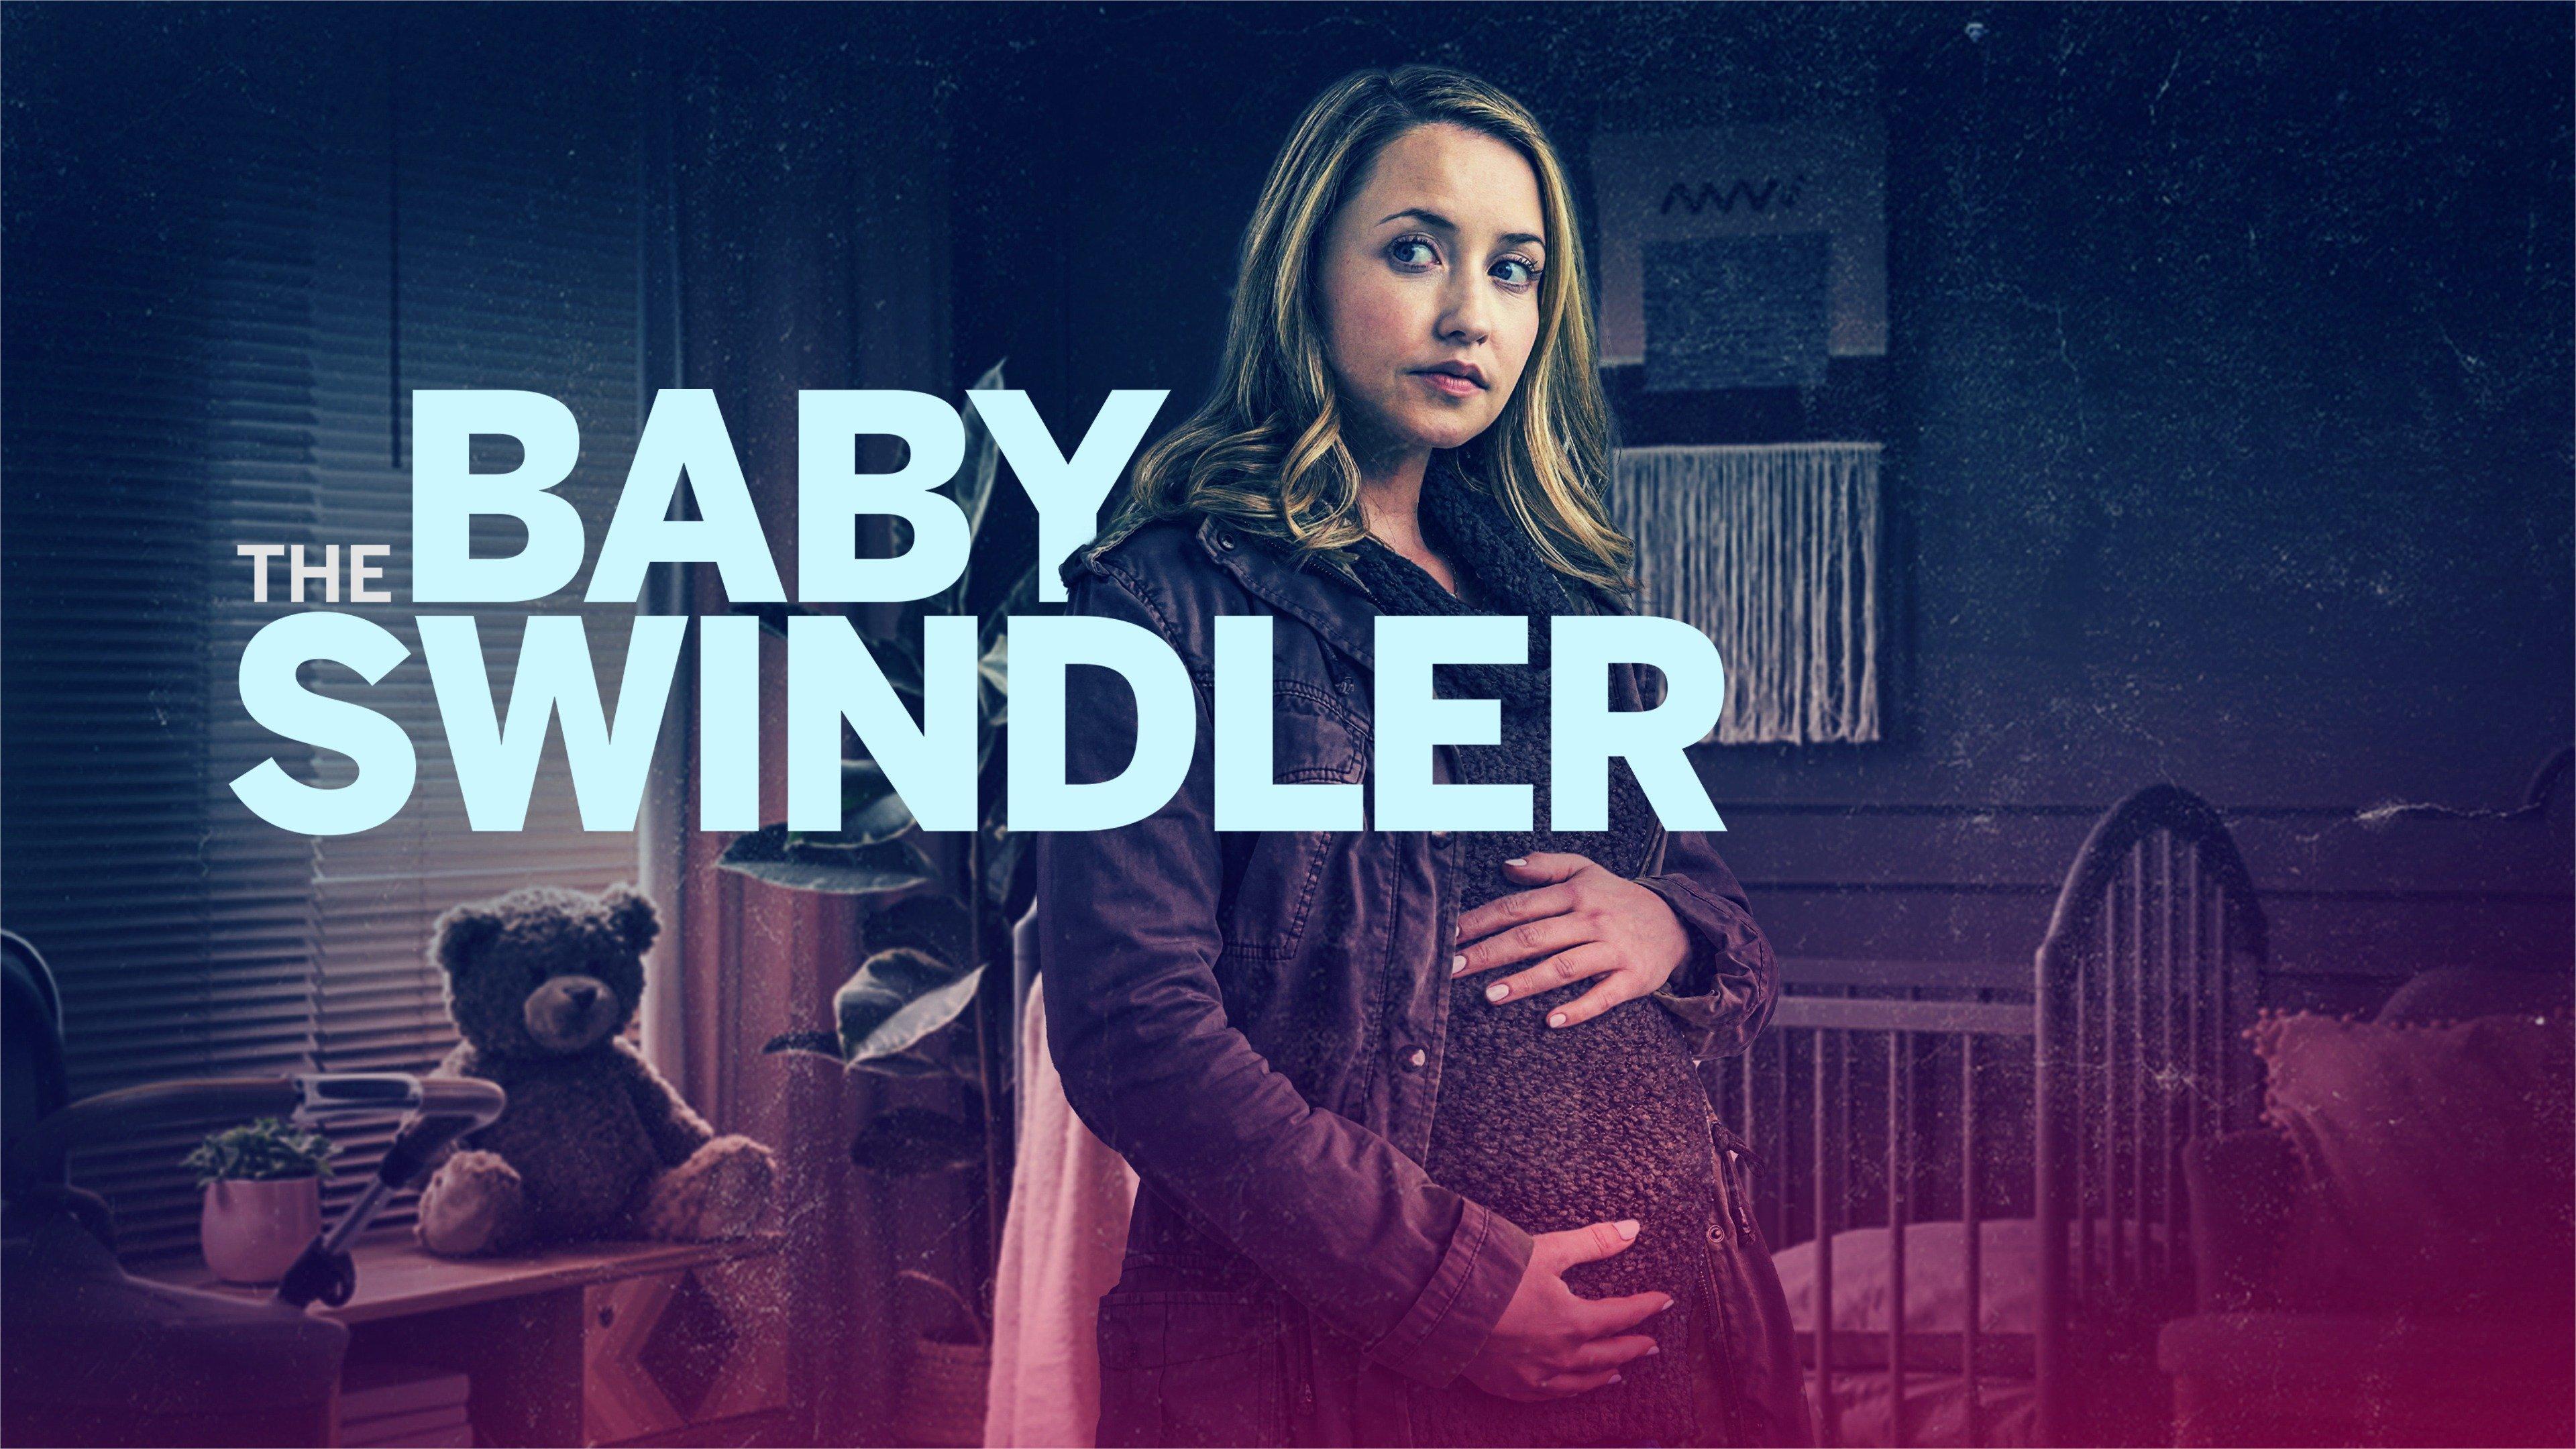 Watch The Baby Swindler Streaming Online on Philo (Free Trial)